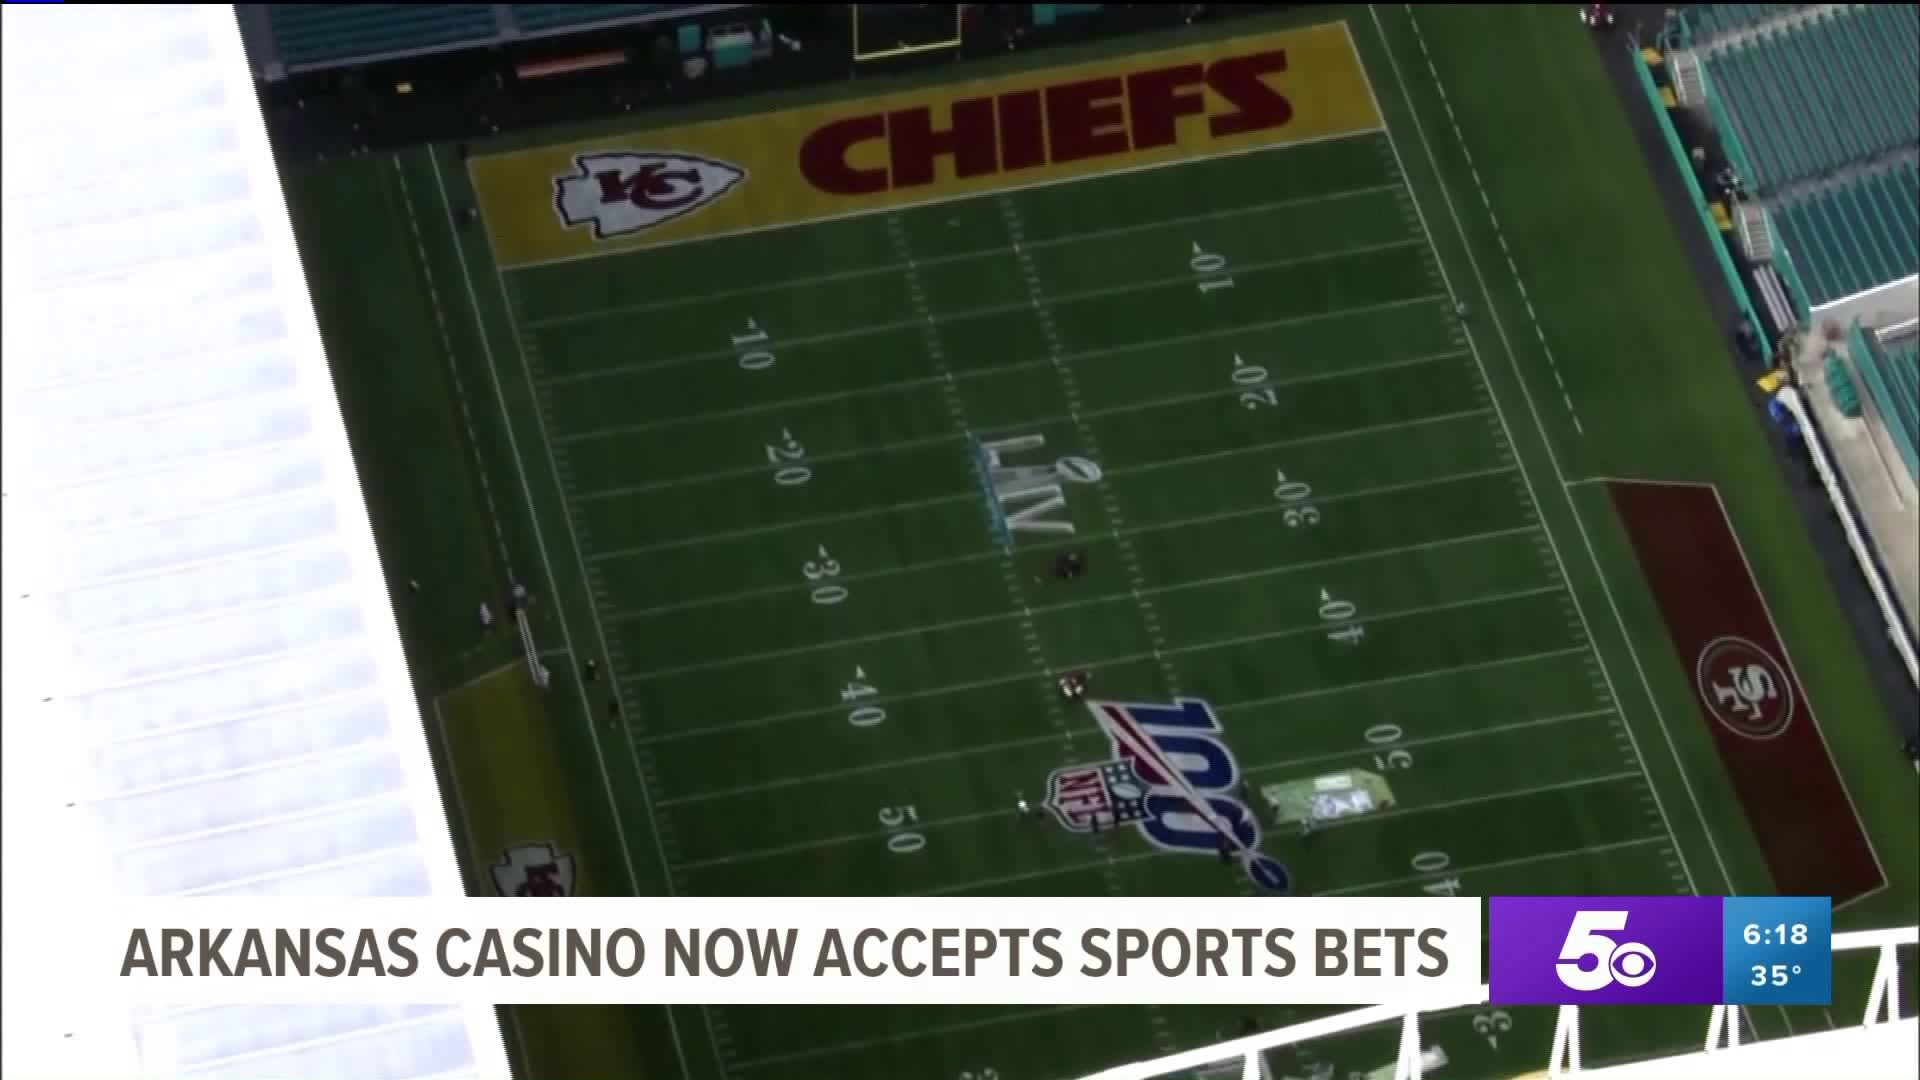 Arkansas Casino Debuts Sports Betting In Time For Super Bowl